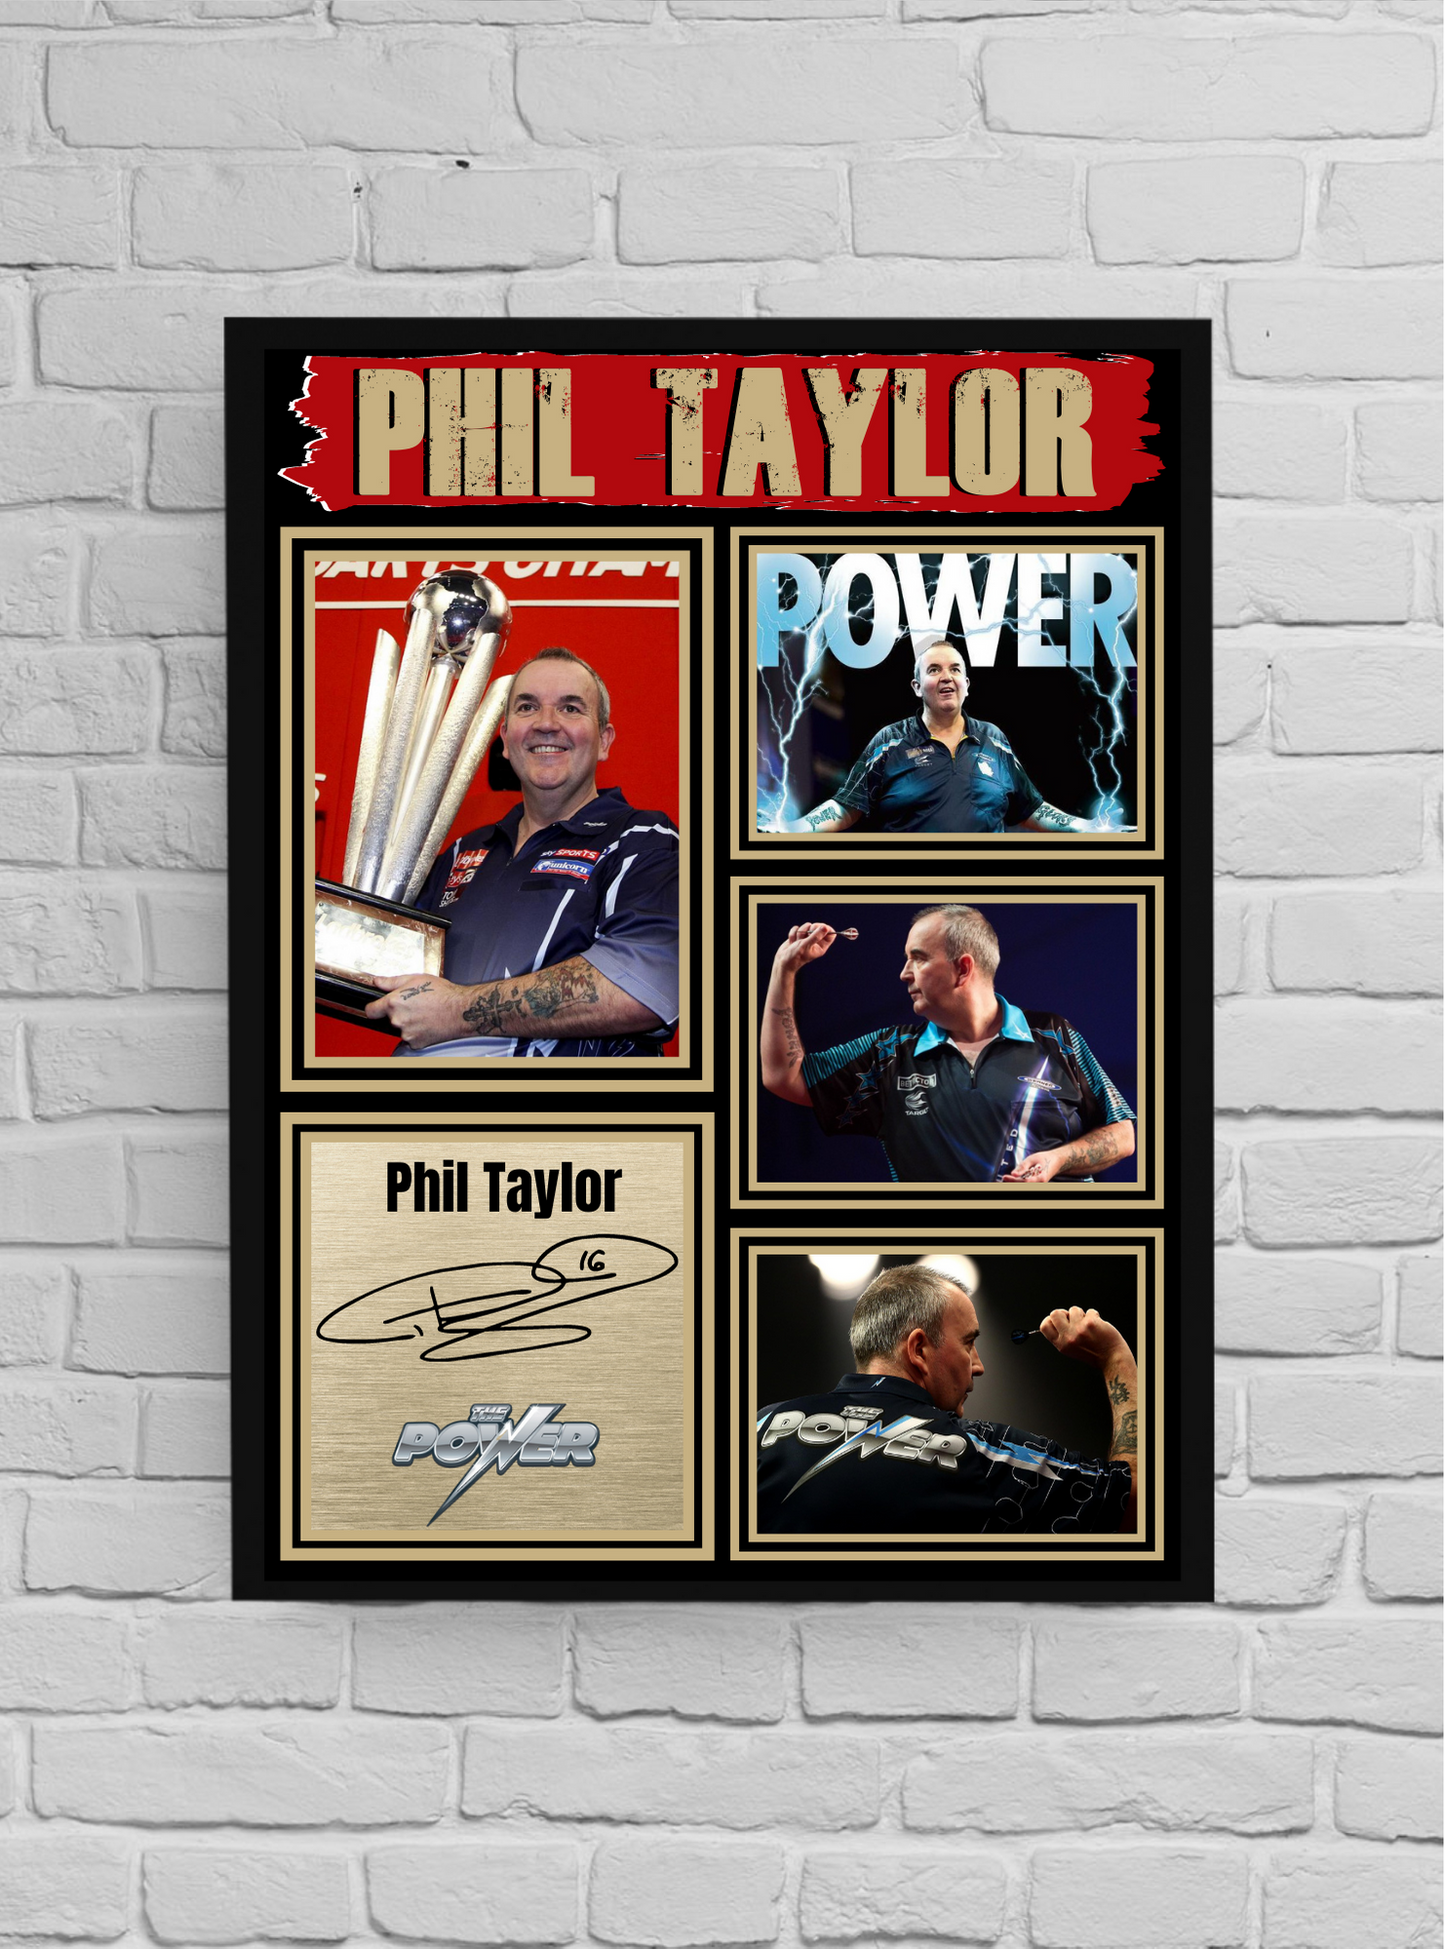 Phil 'The Power' Taylor (Darts) #7 - Memorabilia/Collectible/print signed